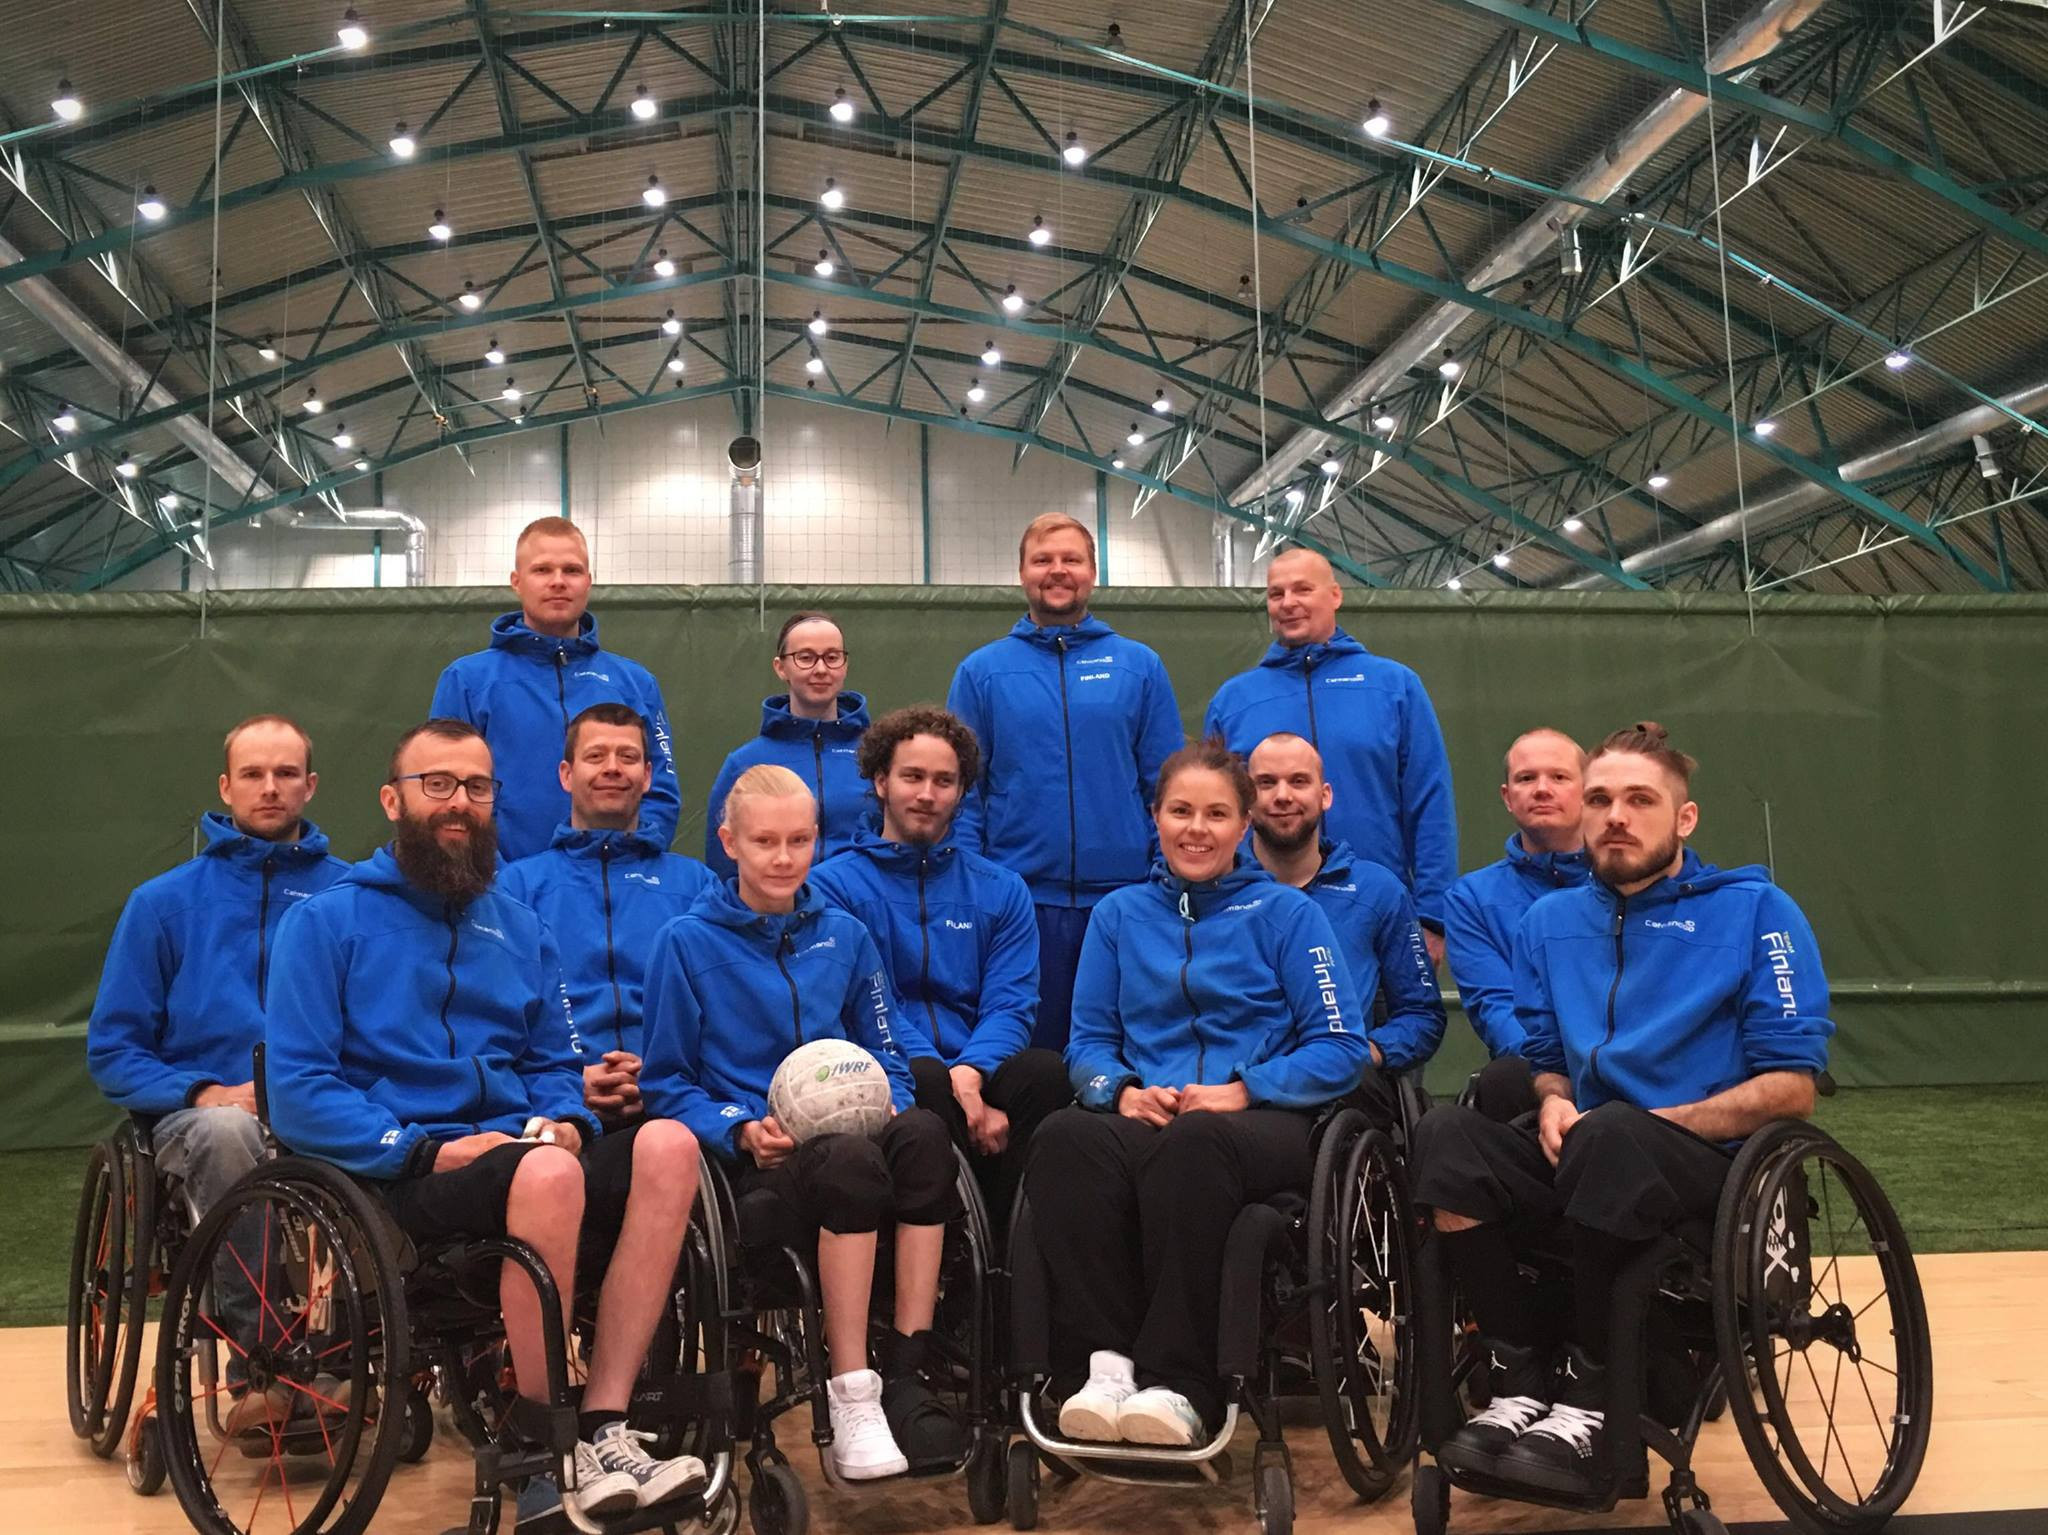 Hosts Finland are 11th in the current IWRF world rankings ©Finnish Wheelchair Rugby